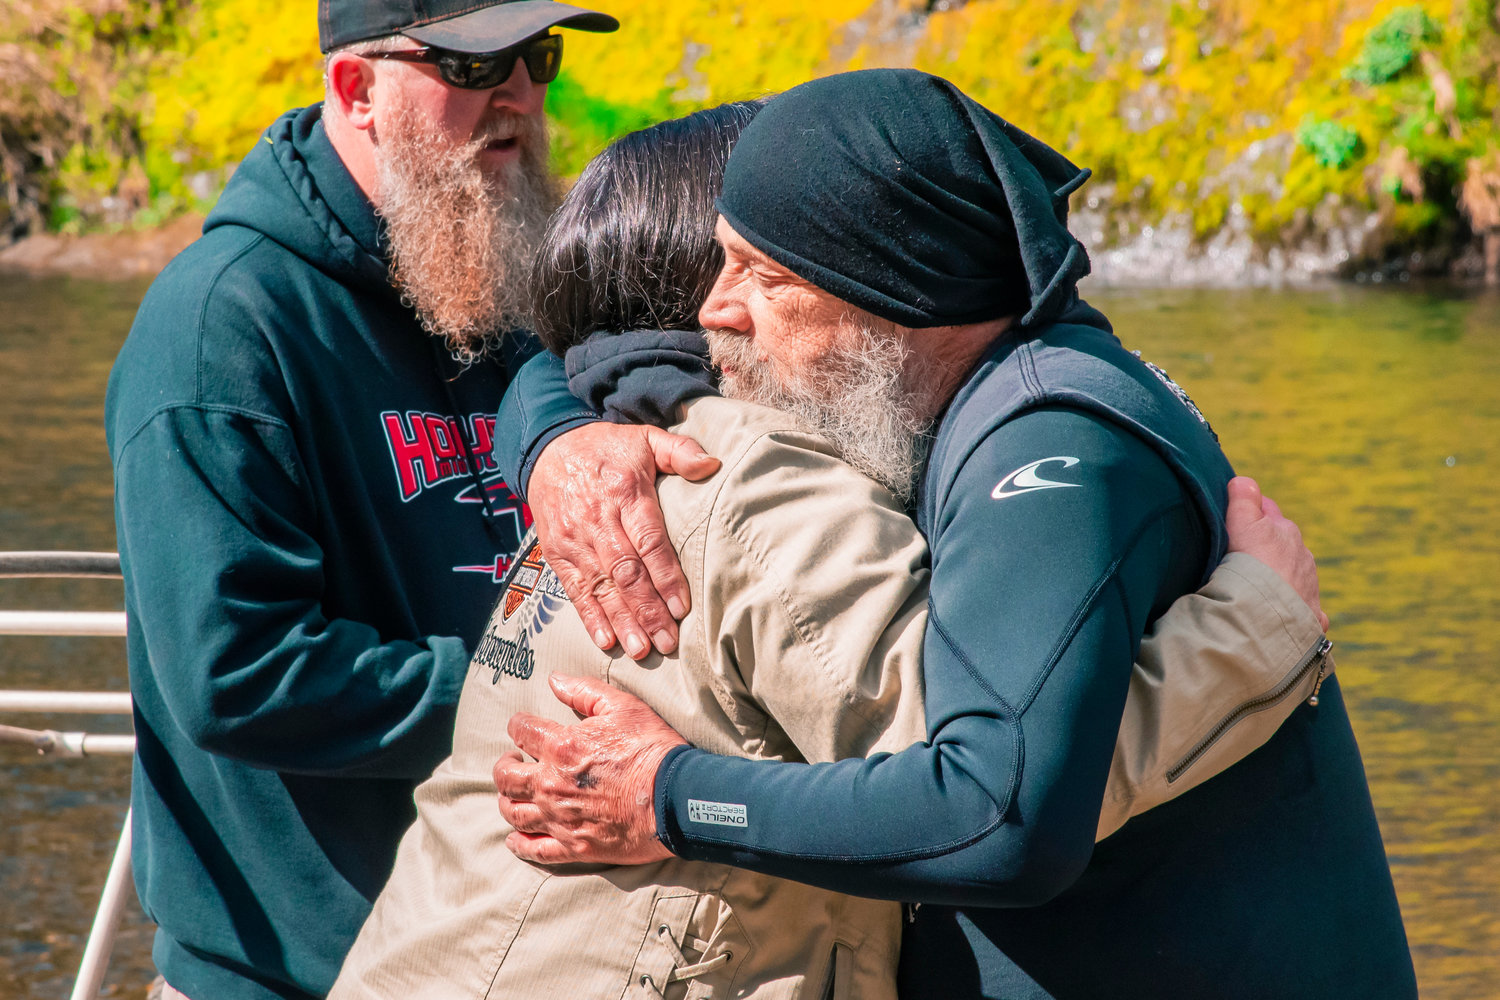 Jim Merrill, the last of the original river runners, embraces attendees before launching into the Chehalis River 43 years after the first official Pe Ell River Run, on Saturday, April 10, 2021.